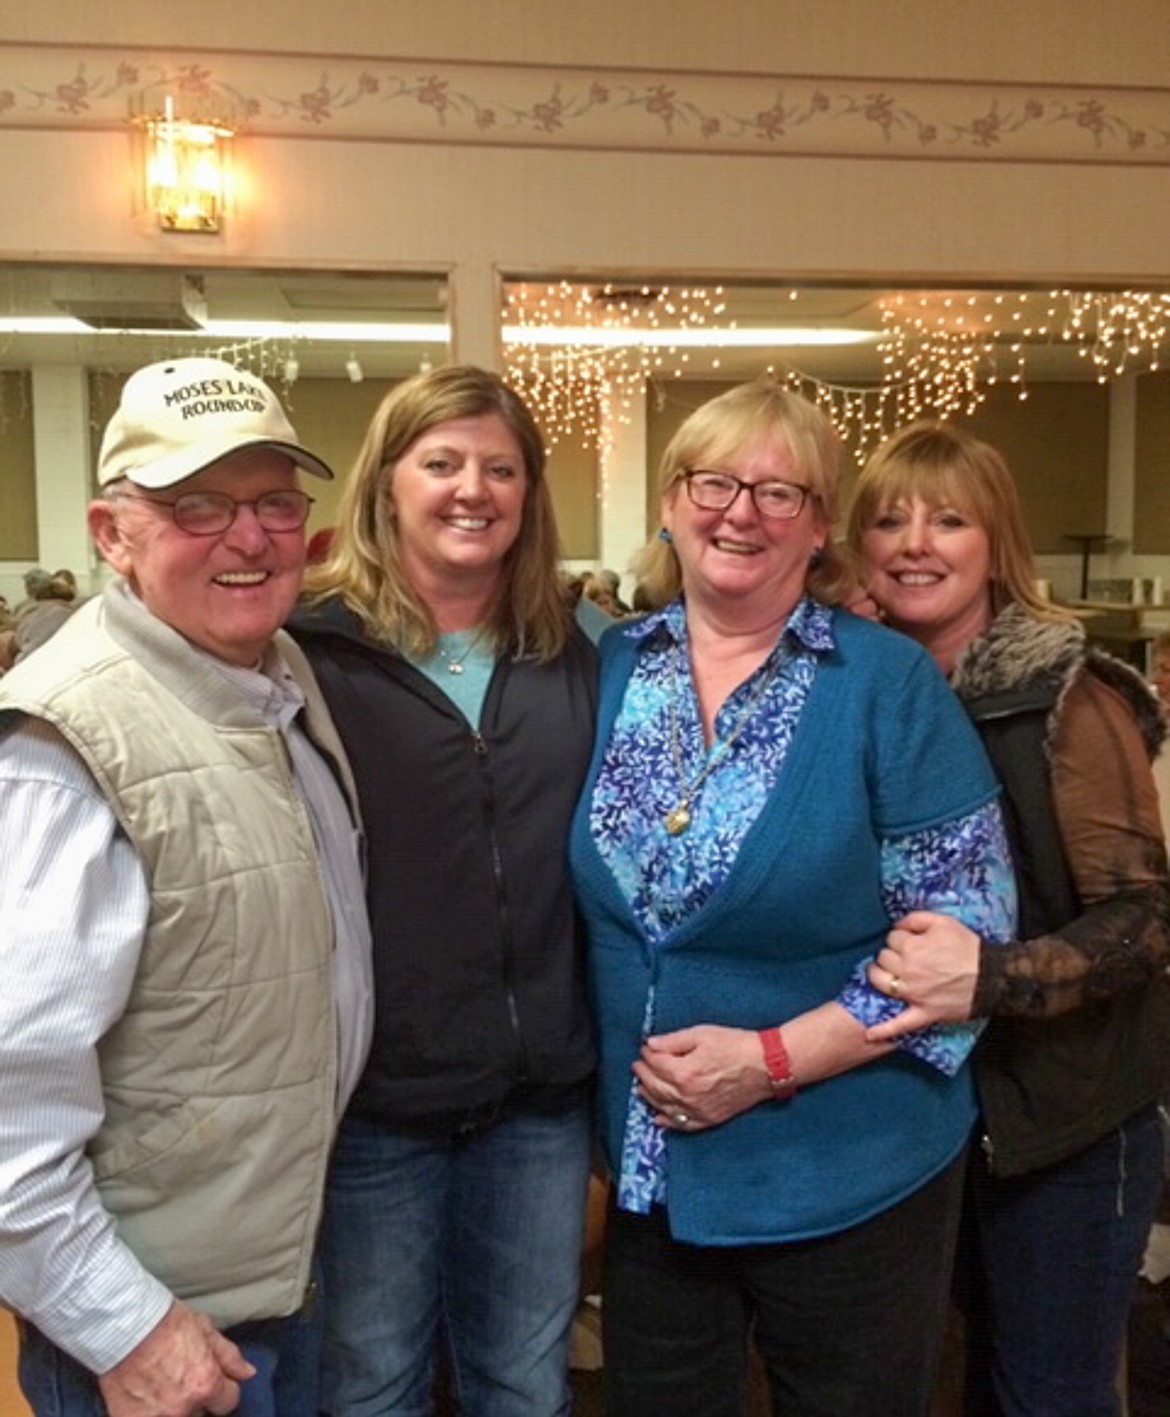 Left to right: Roger Edwards, Kelly Raap, Gaynor Edwards,and Stacey Dowton gather together for a family photo in 2014.